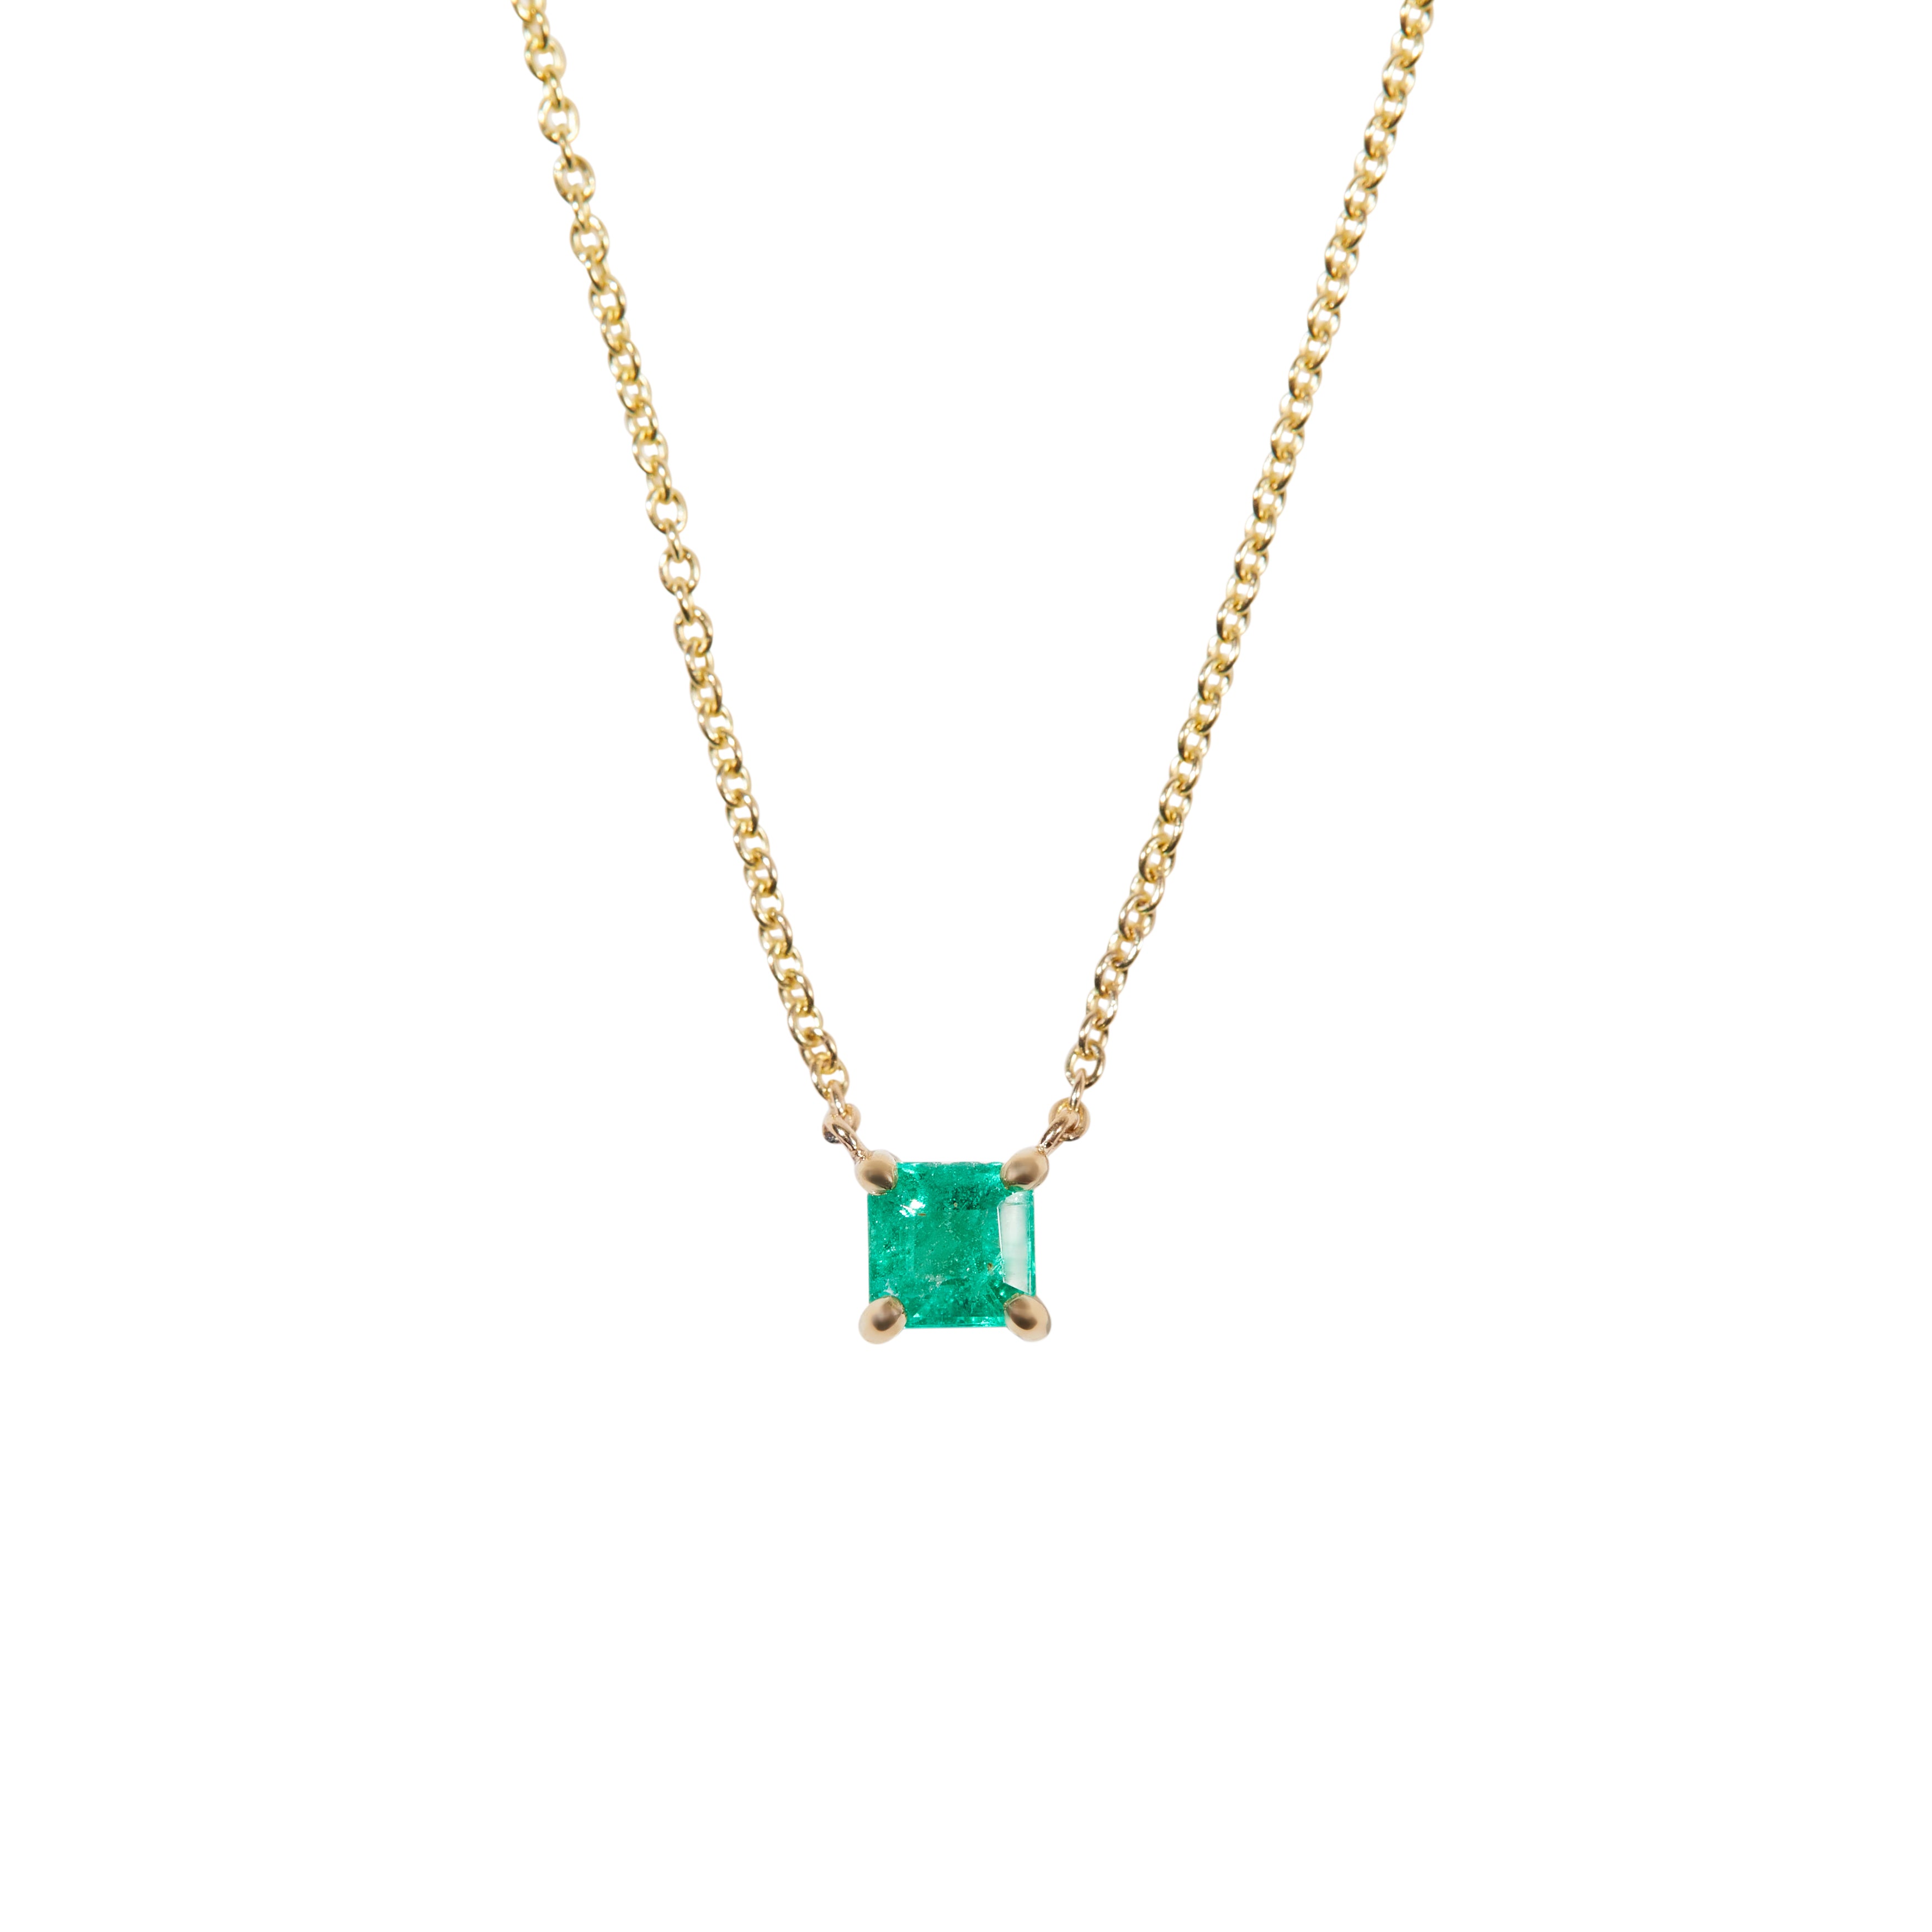 Emerald Solitaire necklace